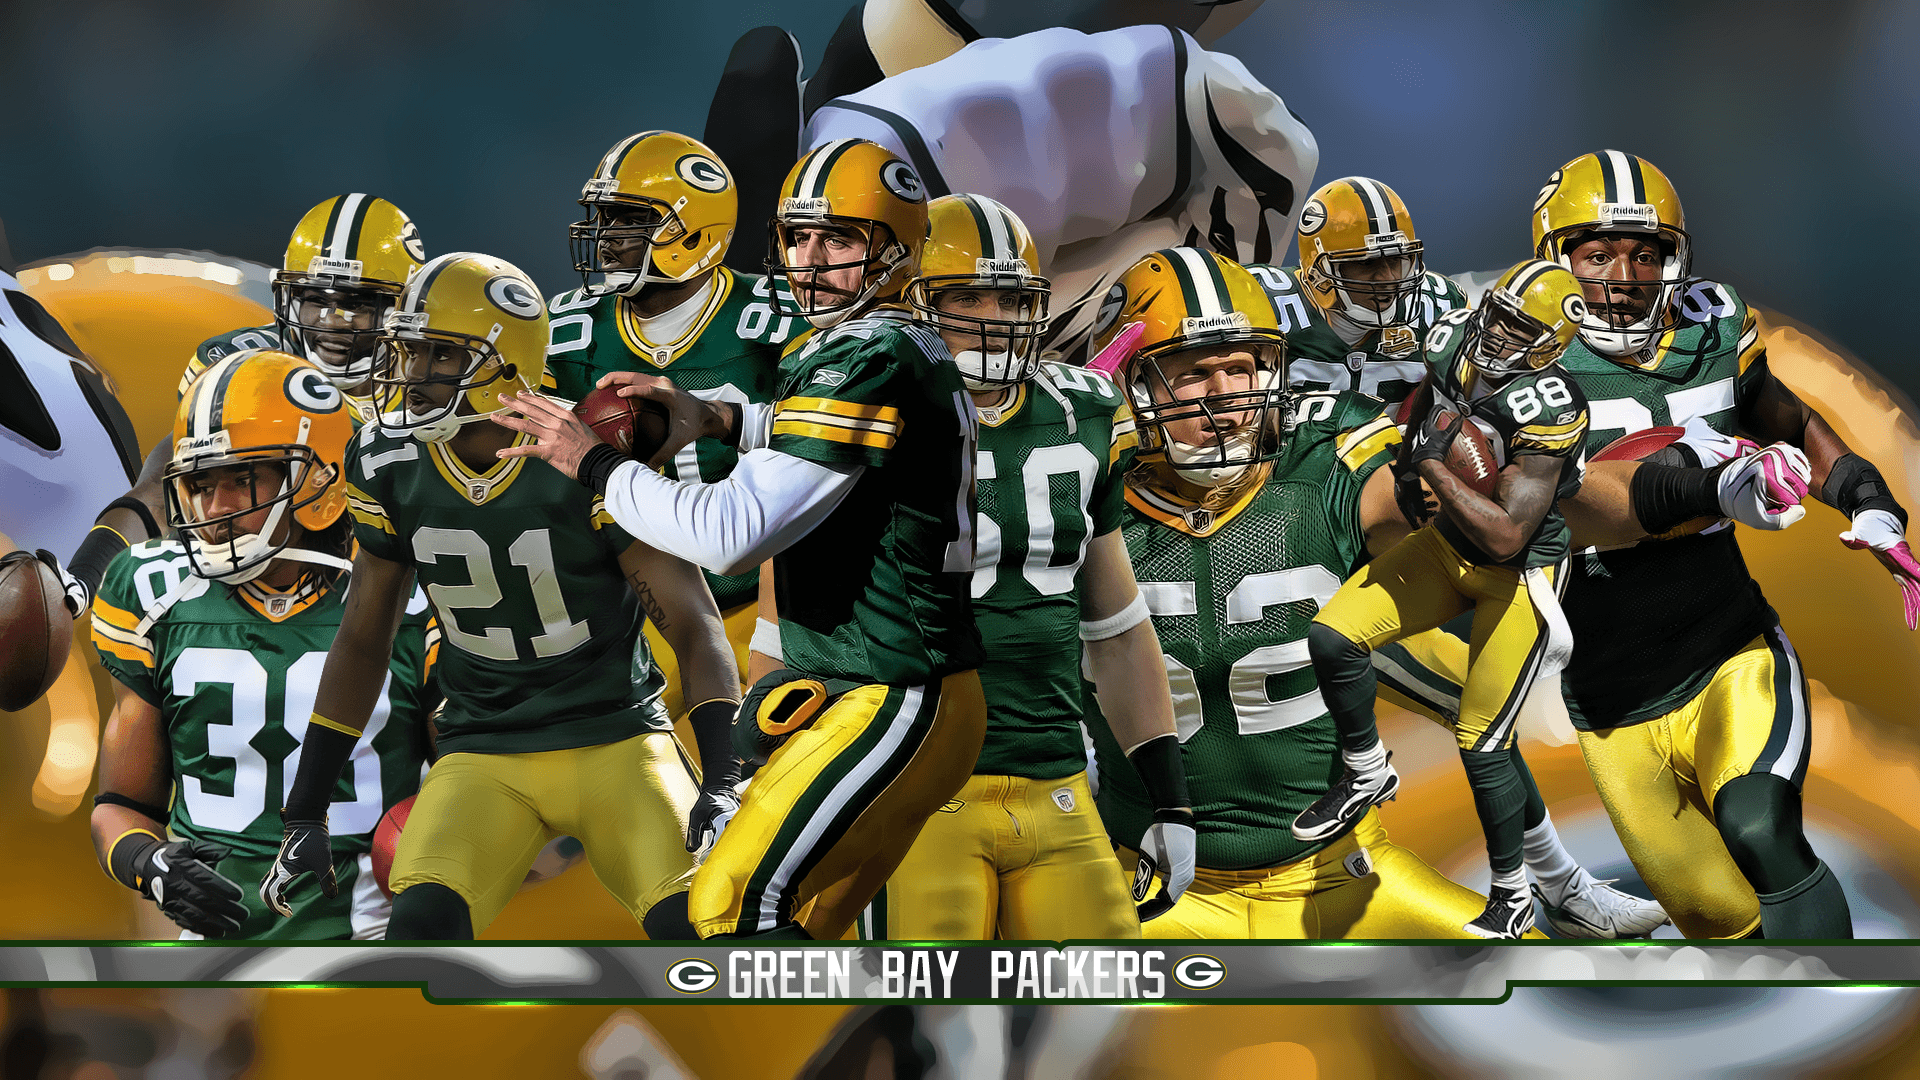 Wallpapers Green Bay Packers Group